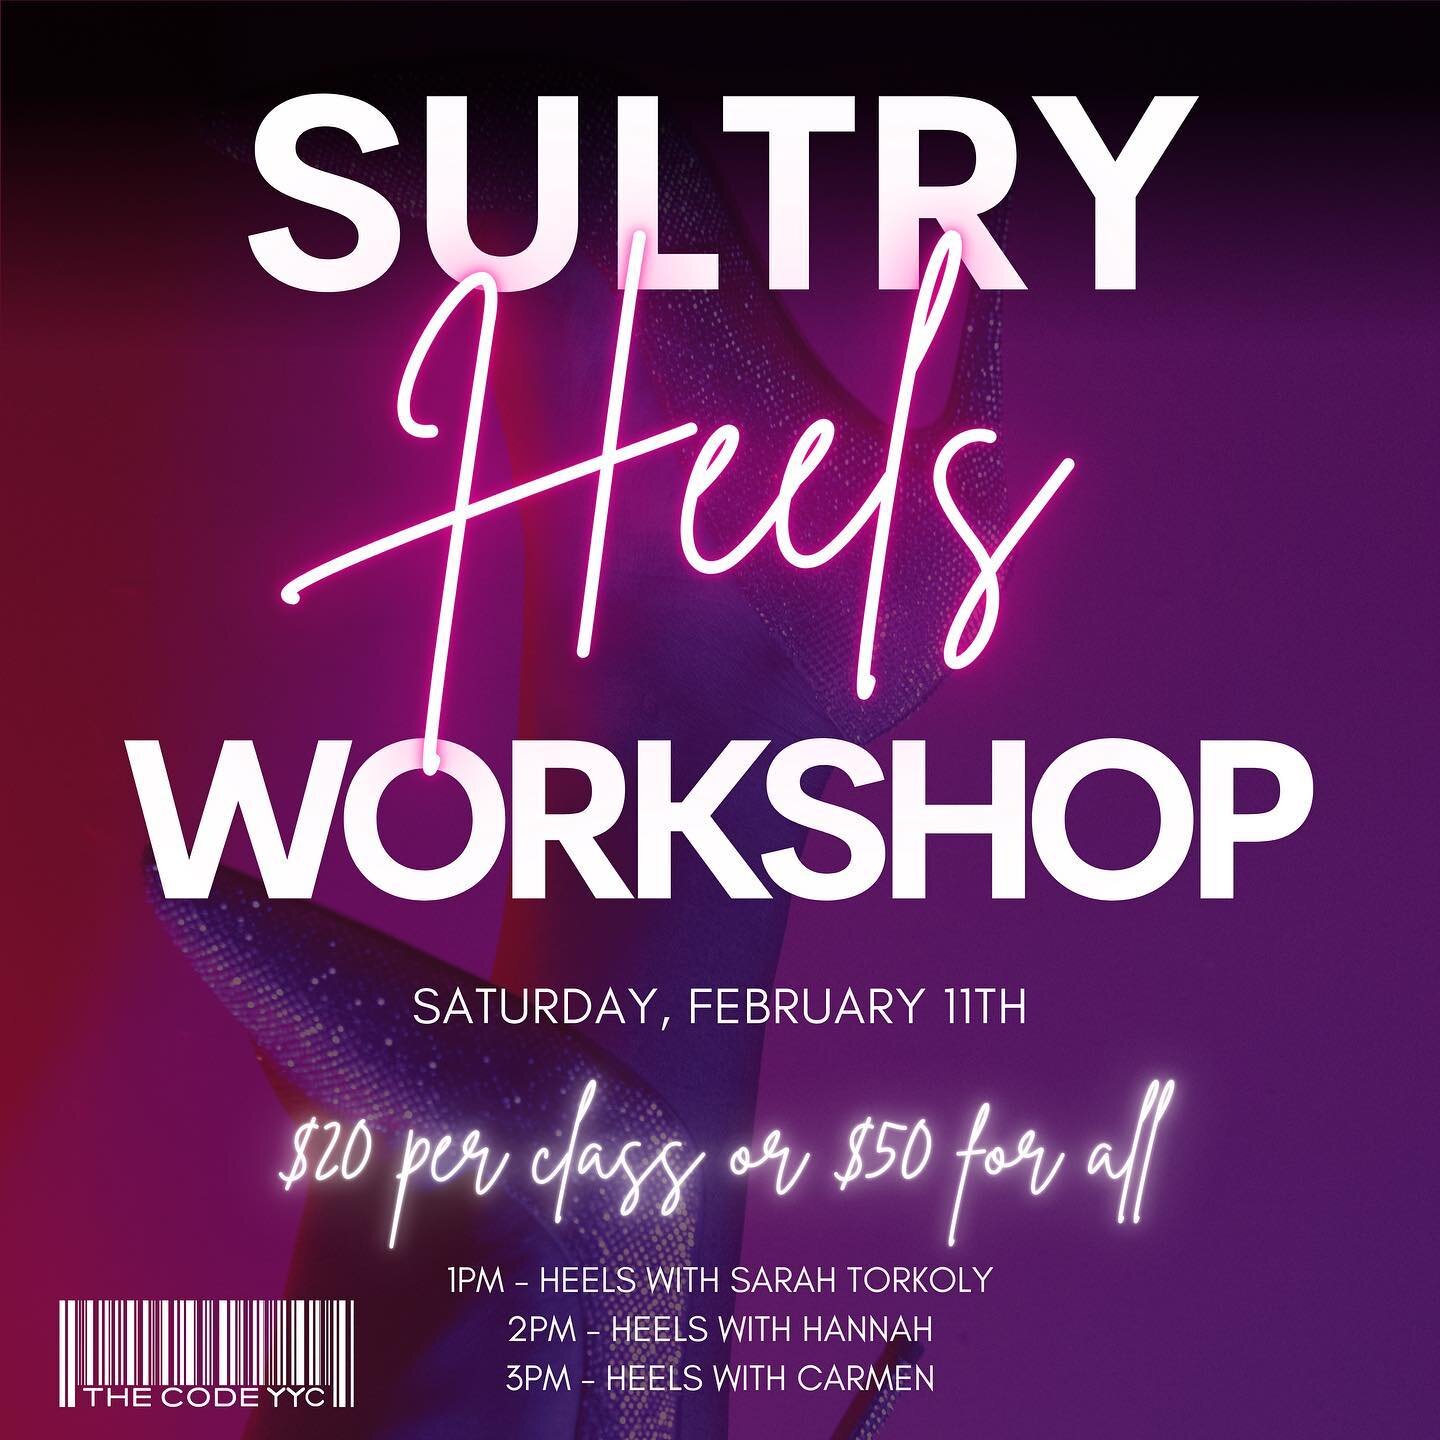 YYC Get ready for our Sultry Heels workshop! 

Saturday, February 11th. 

1:00PM - @storkles 
2:00PM - @hannahmaarry 
3:00PM - @_carmendesilva_ 

Visit our website now for all the details and registration. 

#thecodeyyc #heels #classes #yyc #calgary